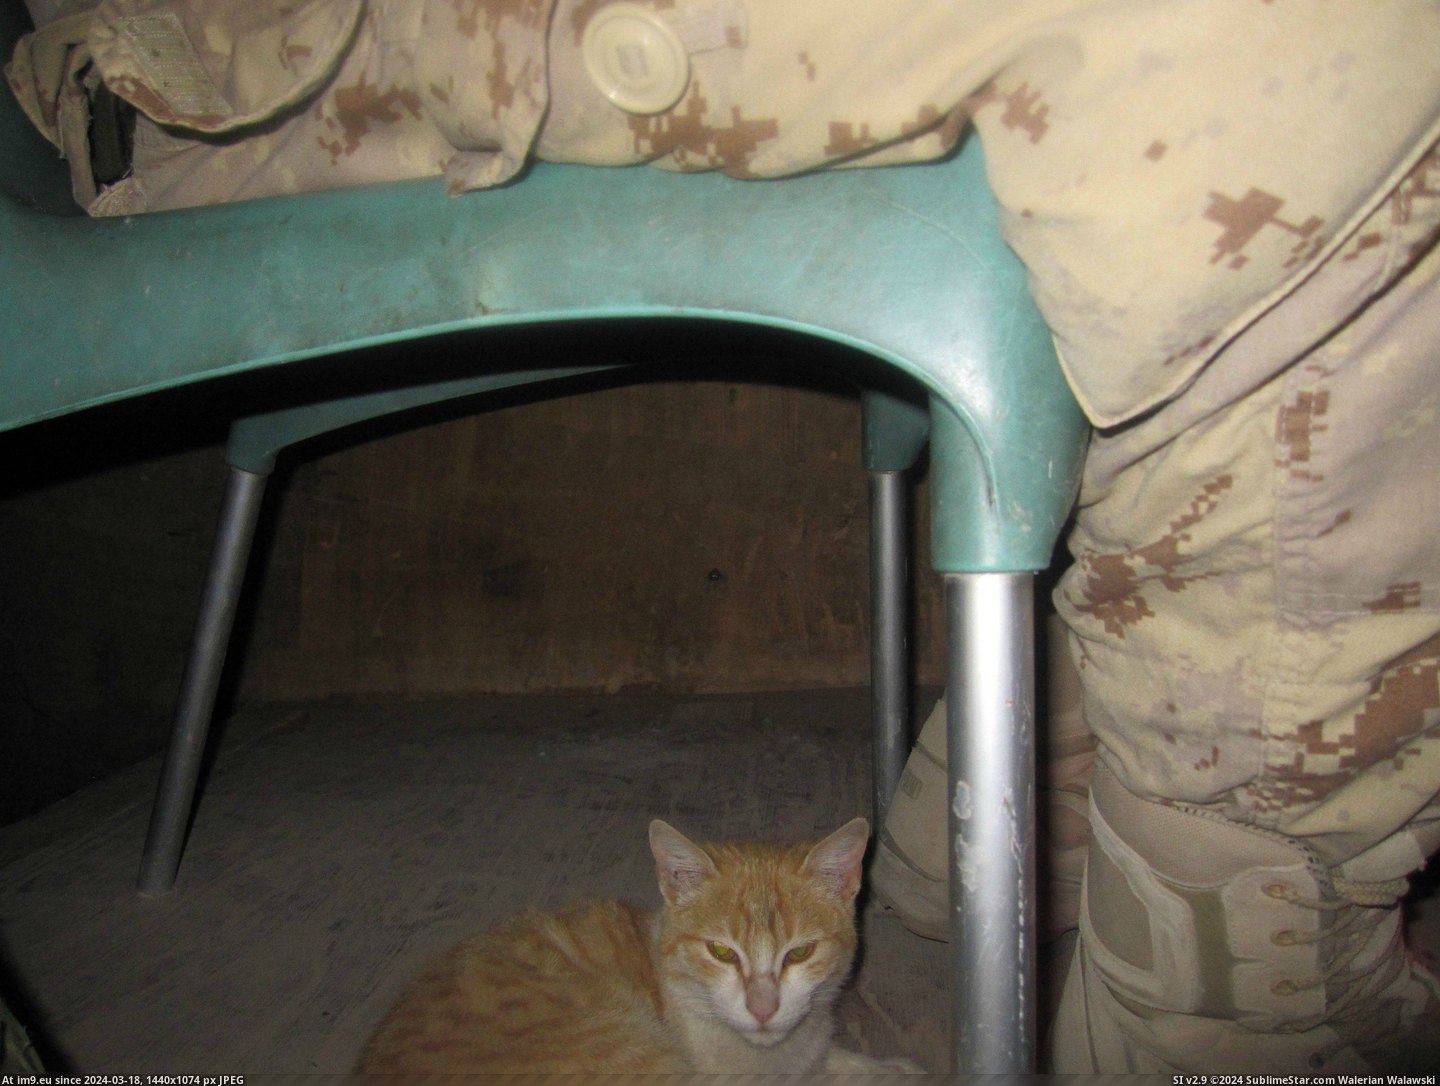 #Cats #Guard #Camp #Afghanistan #Cheetah #Tower #Helping [Cats] Tower Cheetah helping me guard my camp in Afghanistan. 8 Pic. (Image of album My r/CATS favs))